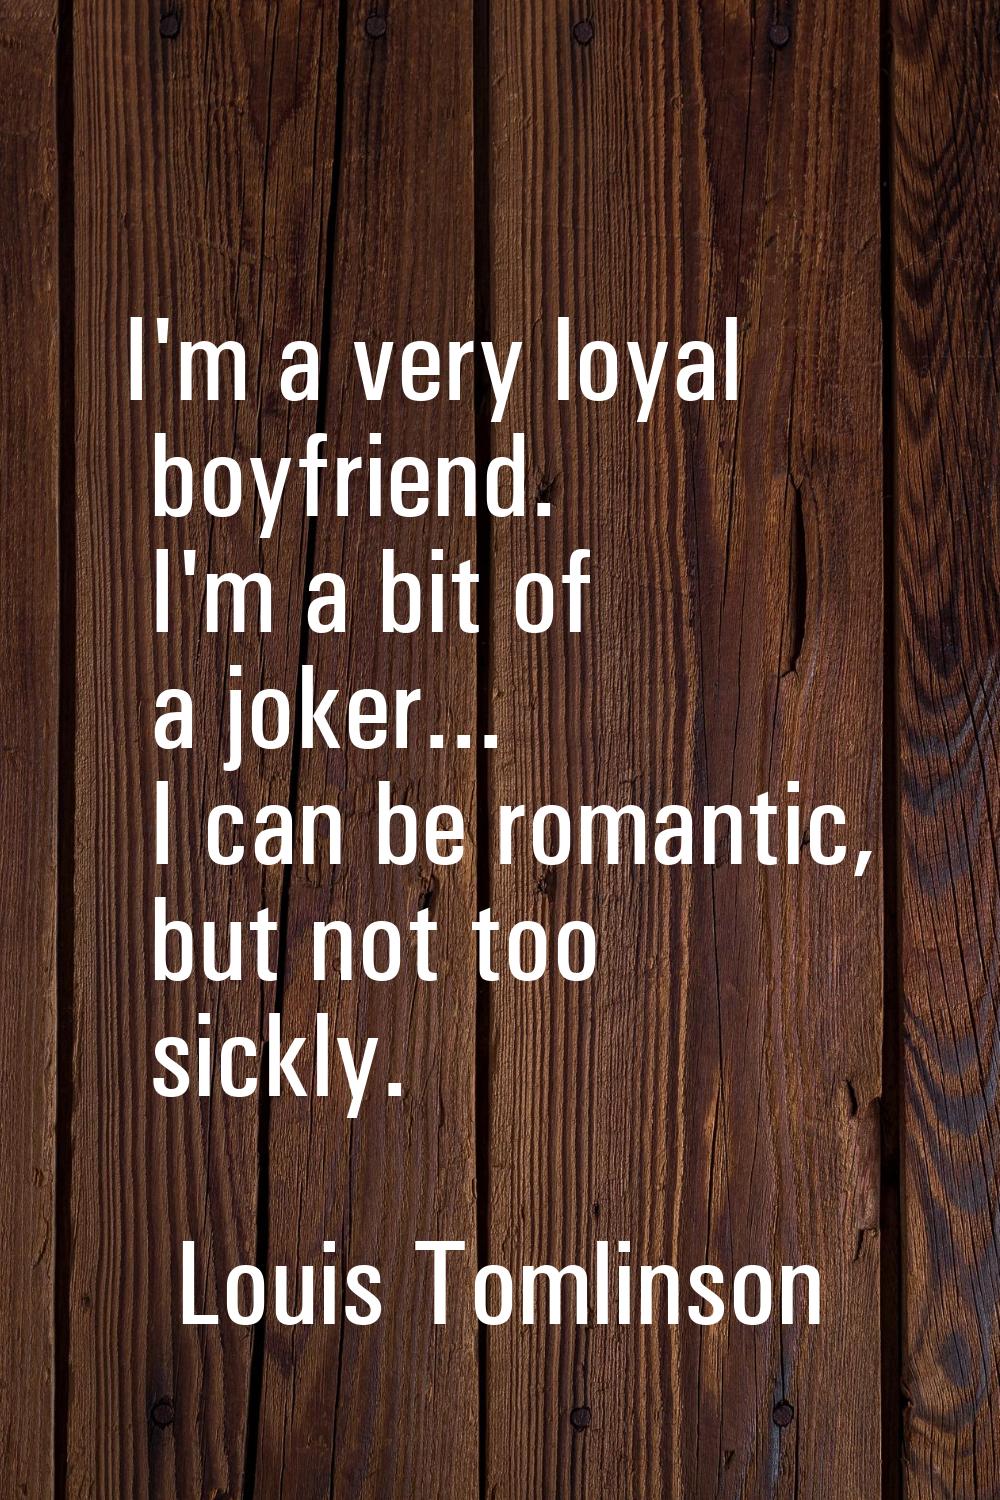 I'm a very loyal boyfriend. I'm a bit of a joker... I can be romantic, but not too sickly.